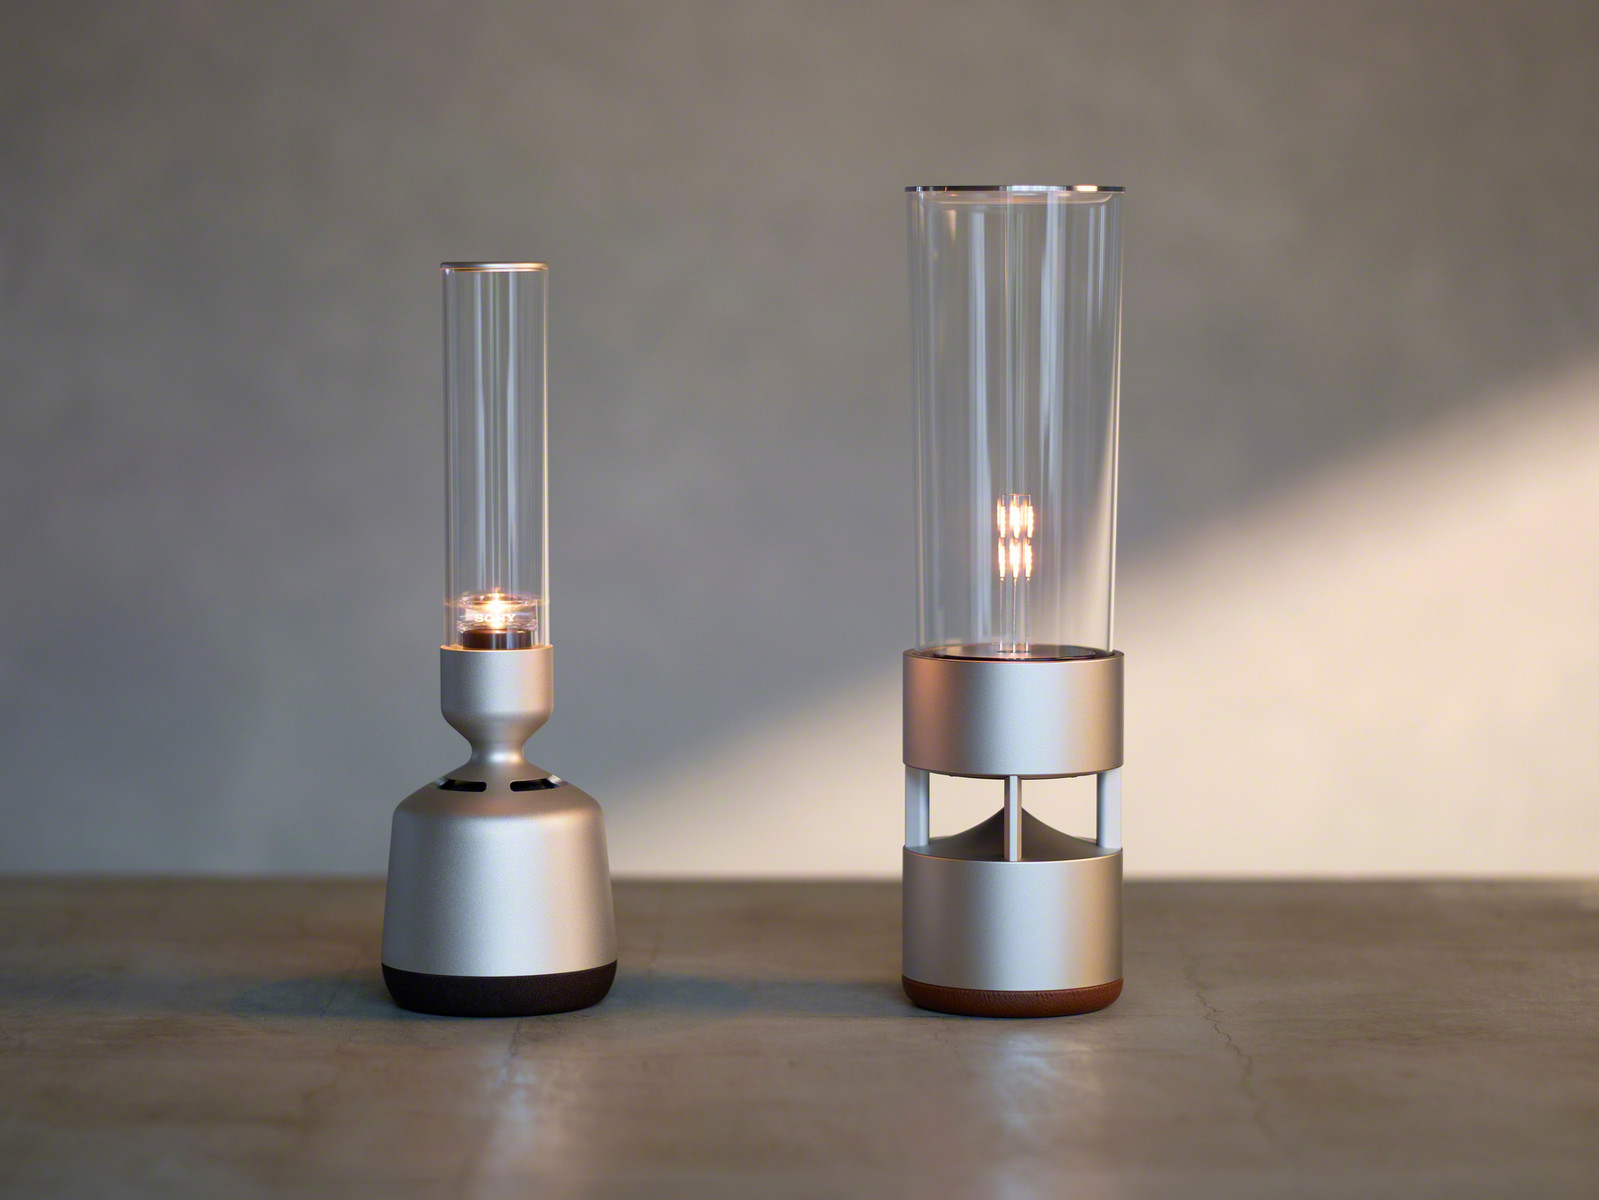 Sony LSPX-S2: A wireless glass speaker that is also an LED candle